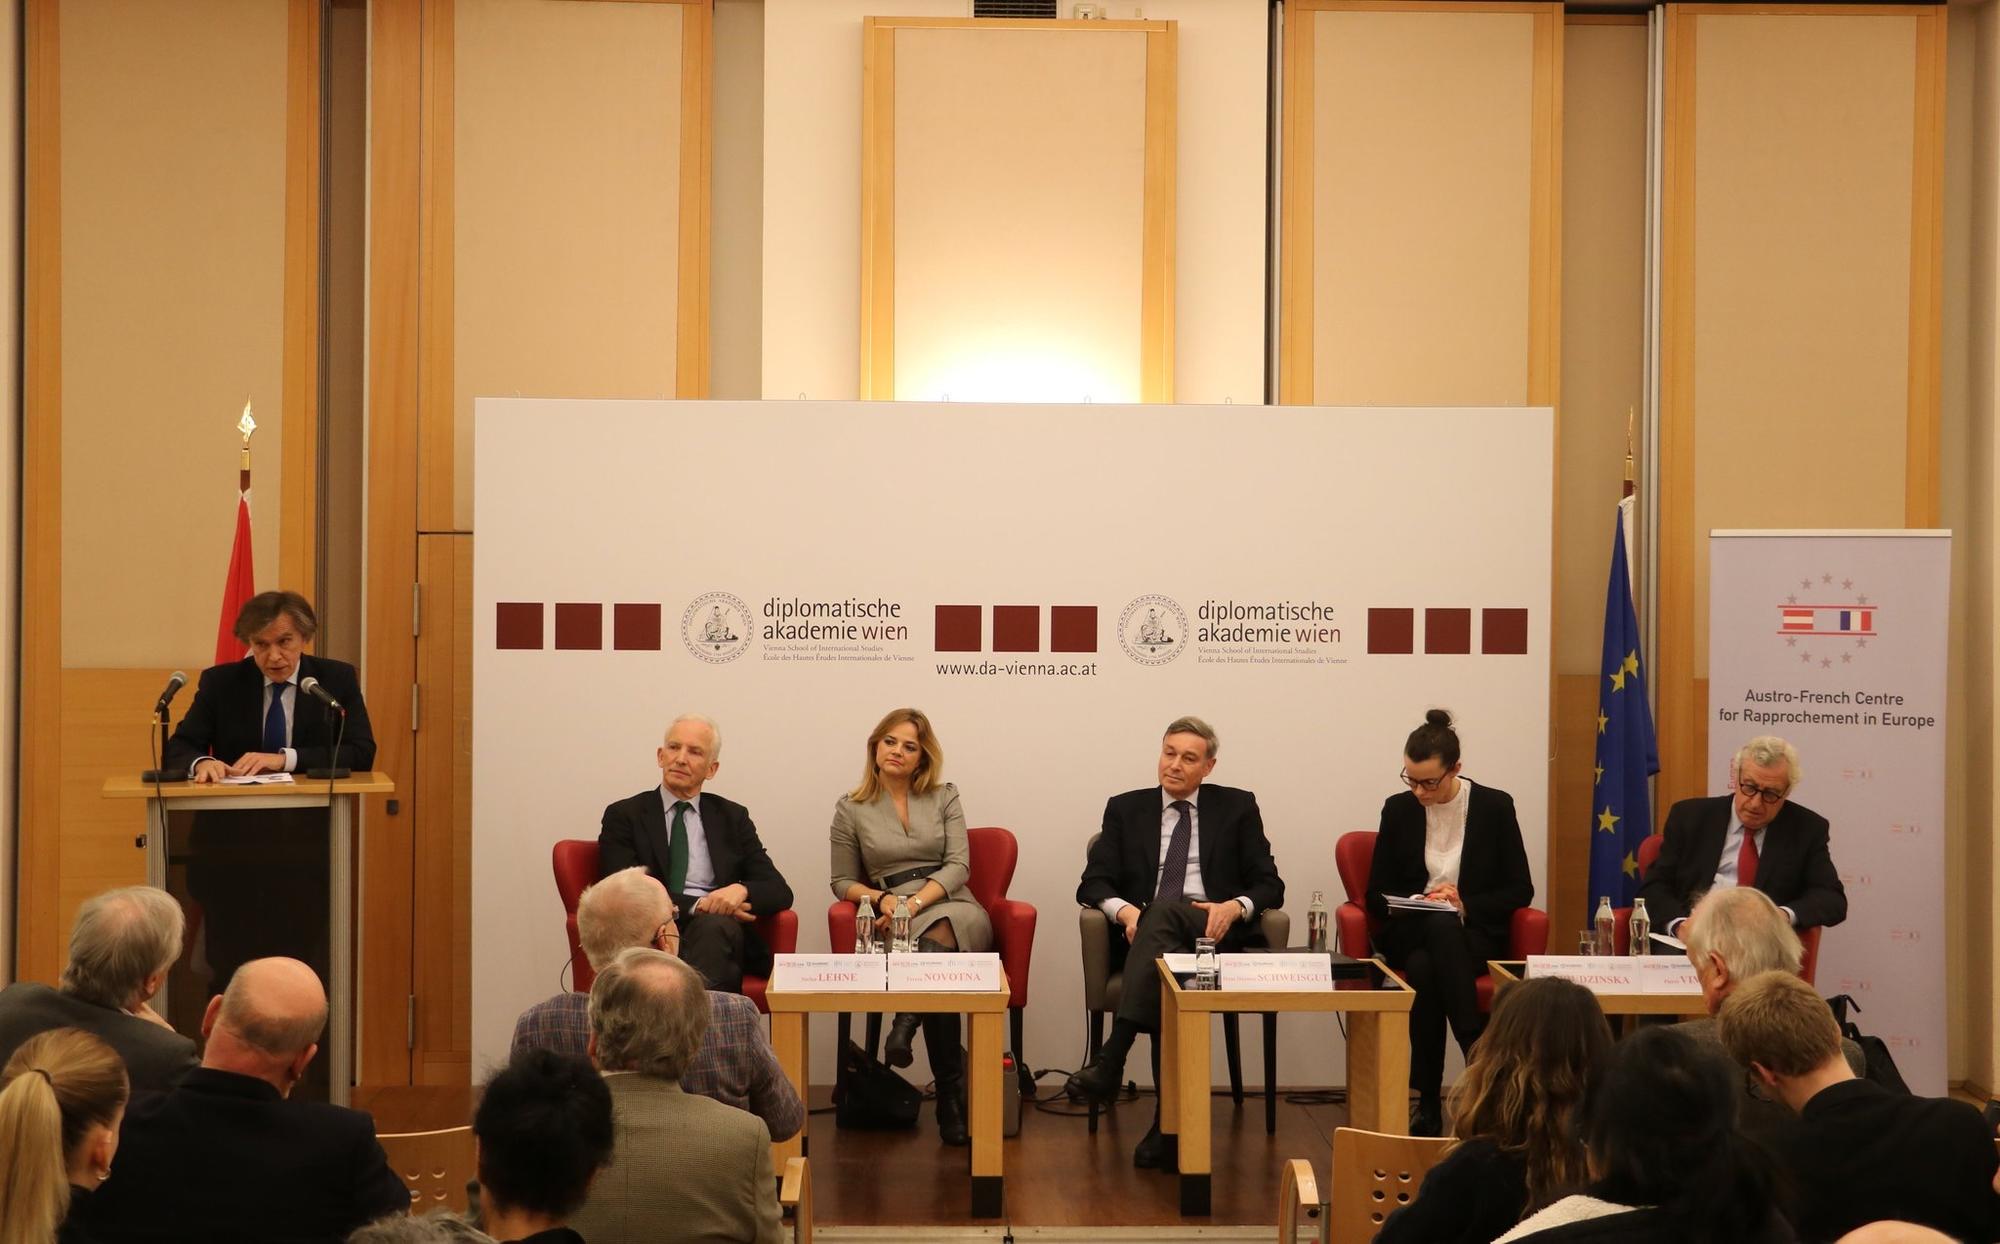 Tereza Novotna participated at the event on the future of EU foreign policy at the Diplomatic Academy Vienna